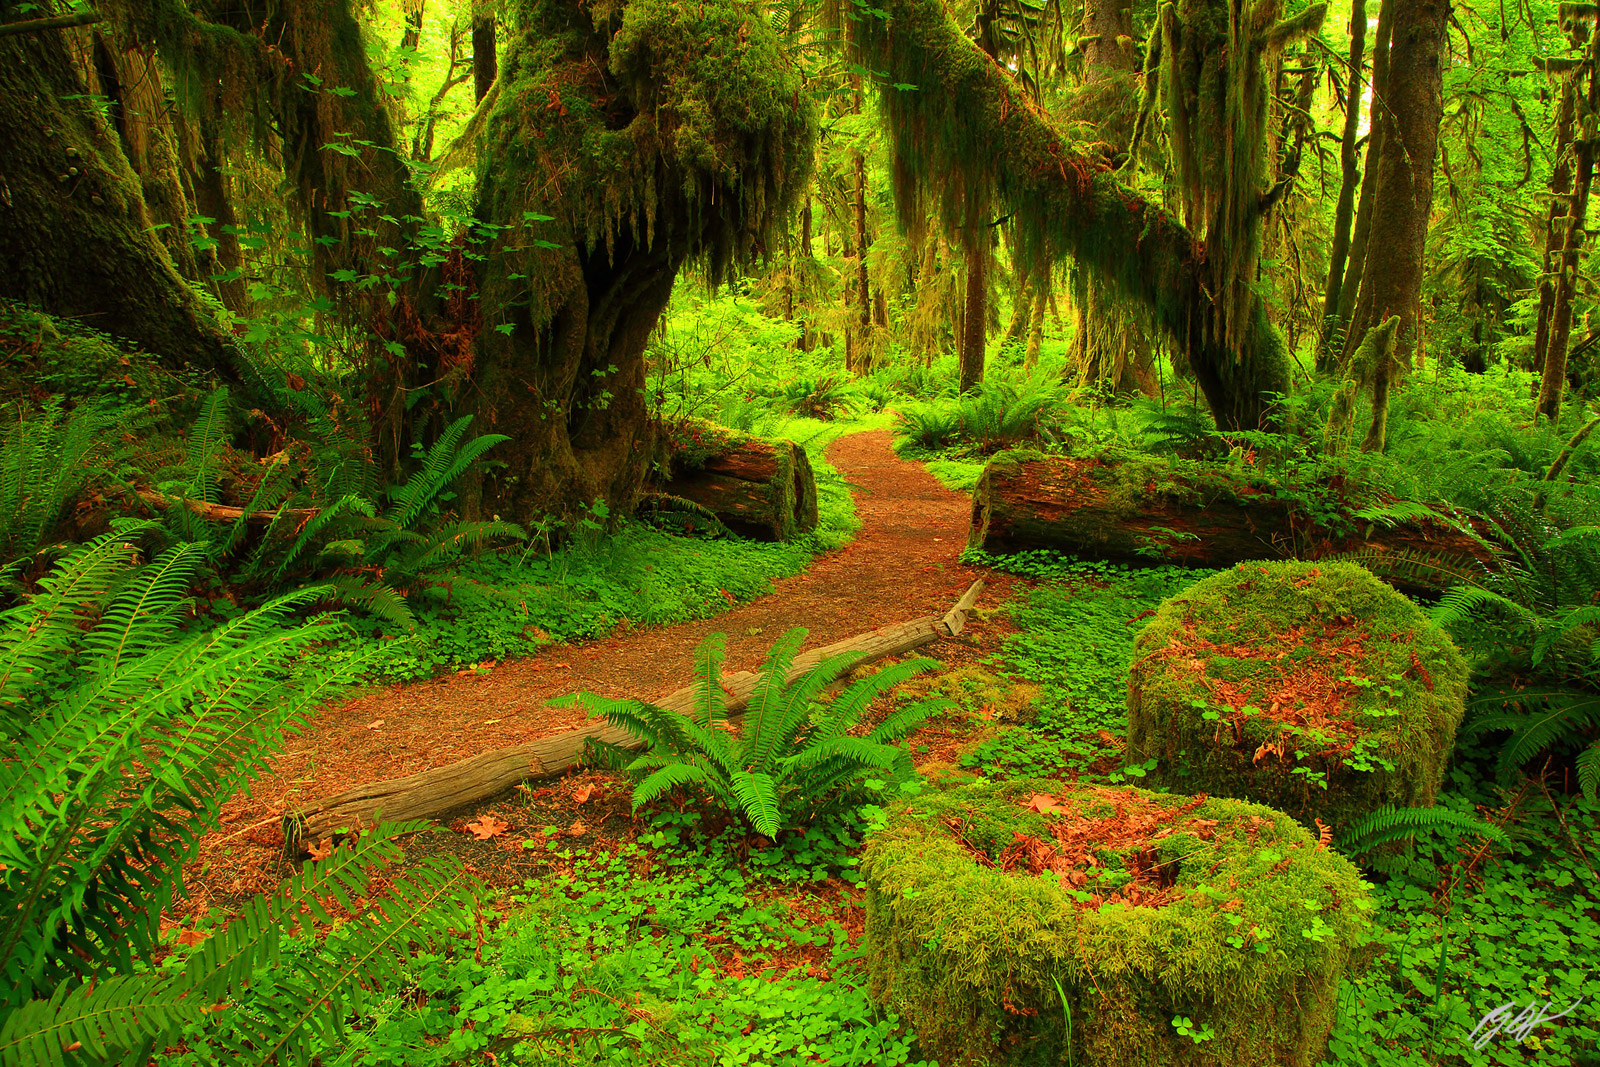 Maple Glade Trail, Quinault Rainforest in Olympic National Park, Washington